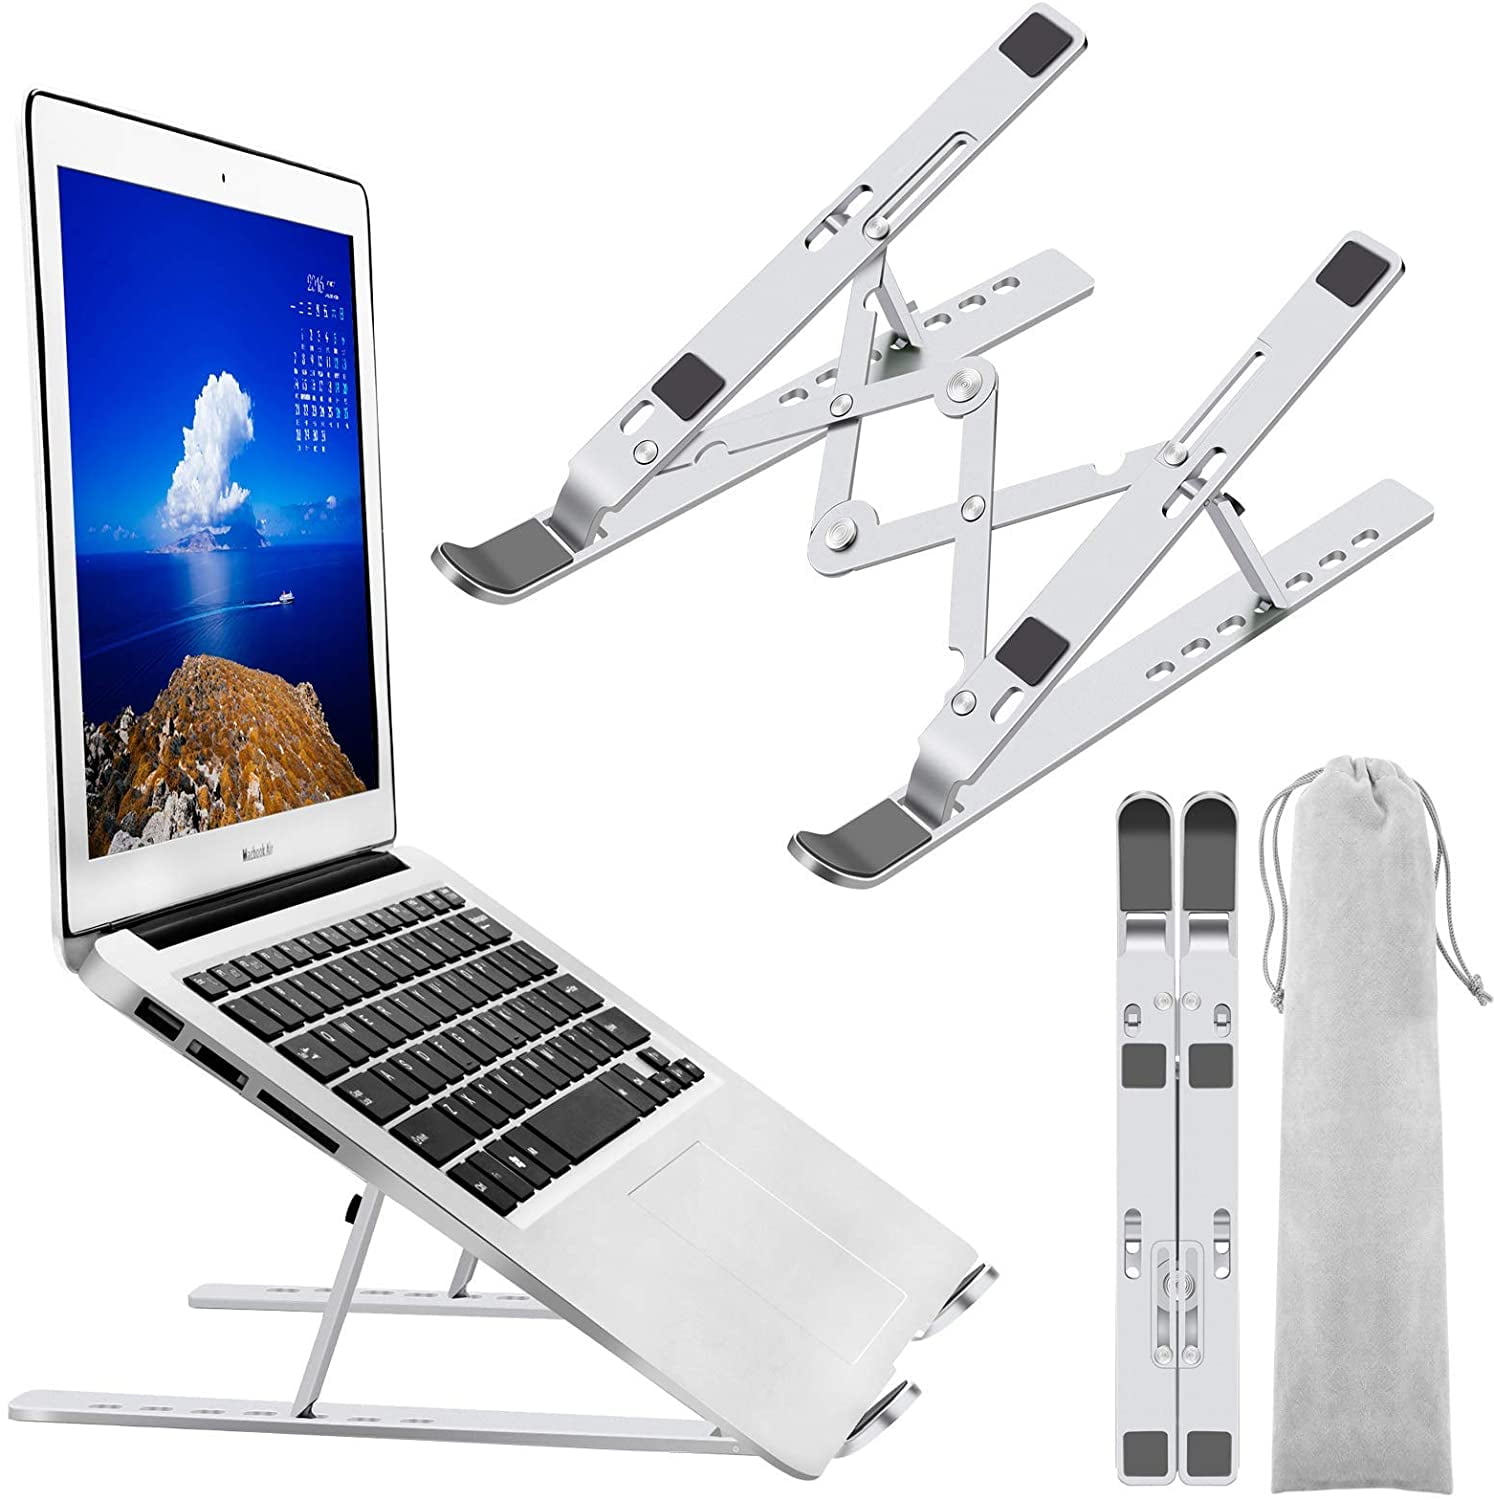 Portable Folding Increased Radiator Notebook Holder Stand Compatible with More 10-15.6”Laptops Color : Silver Aluminum Alloy Laptop Stand Computer Stand